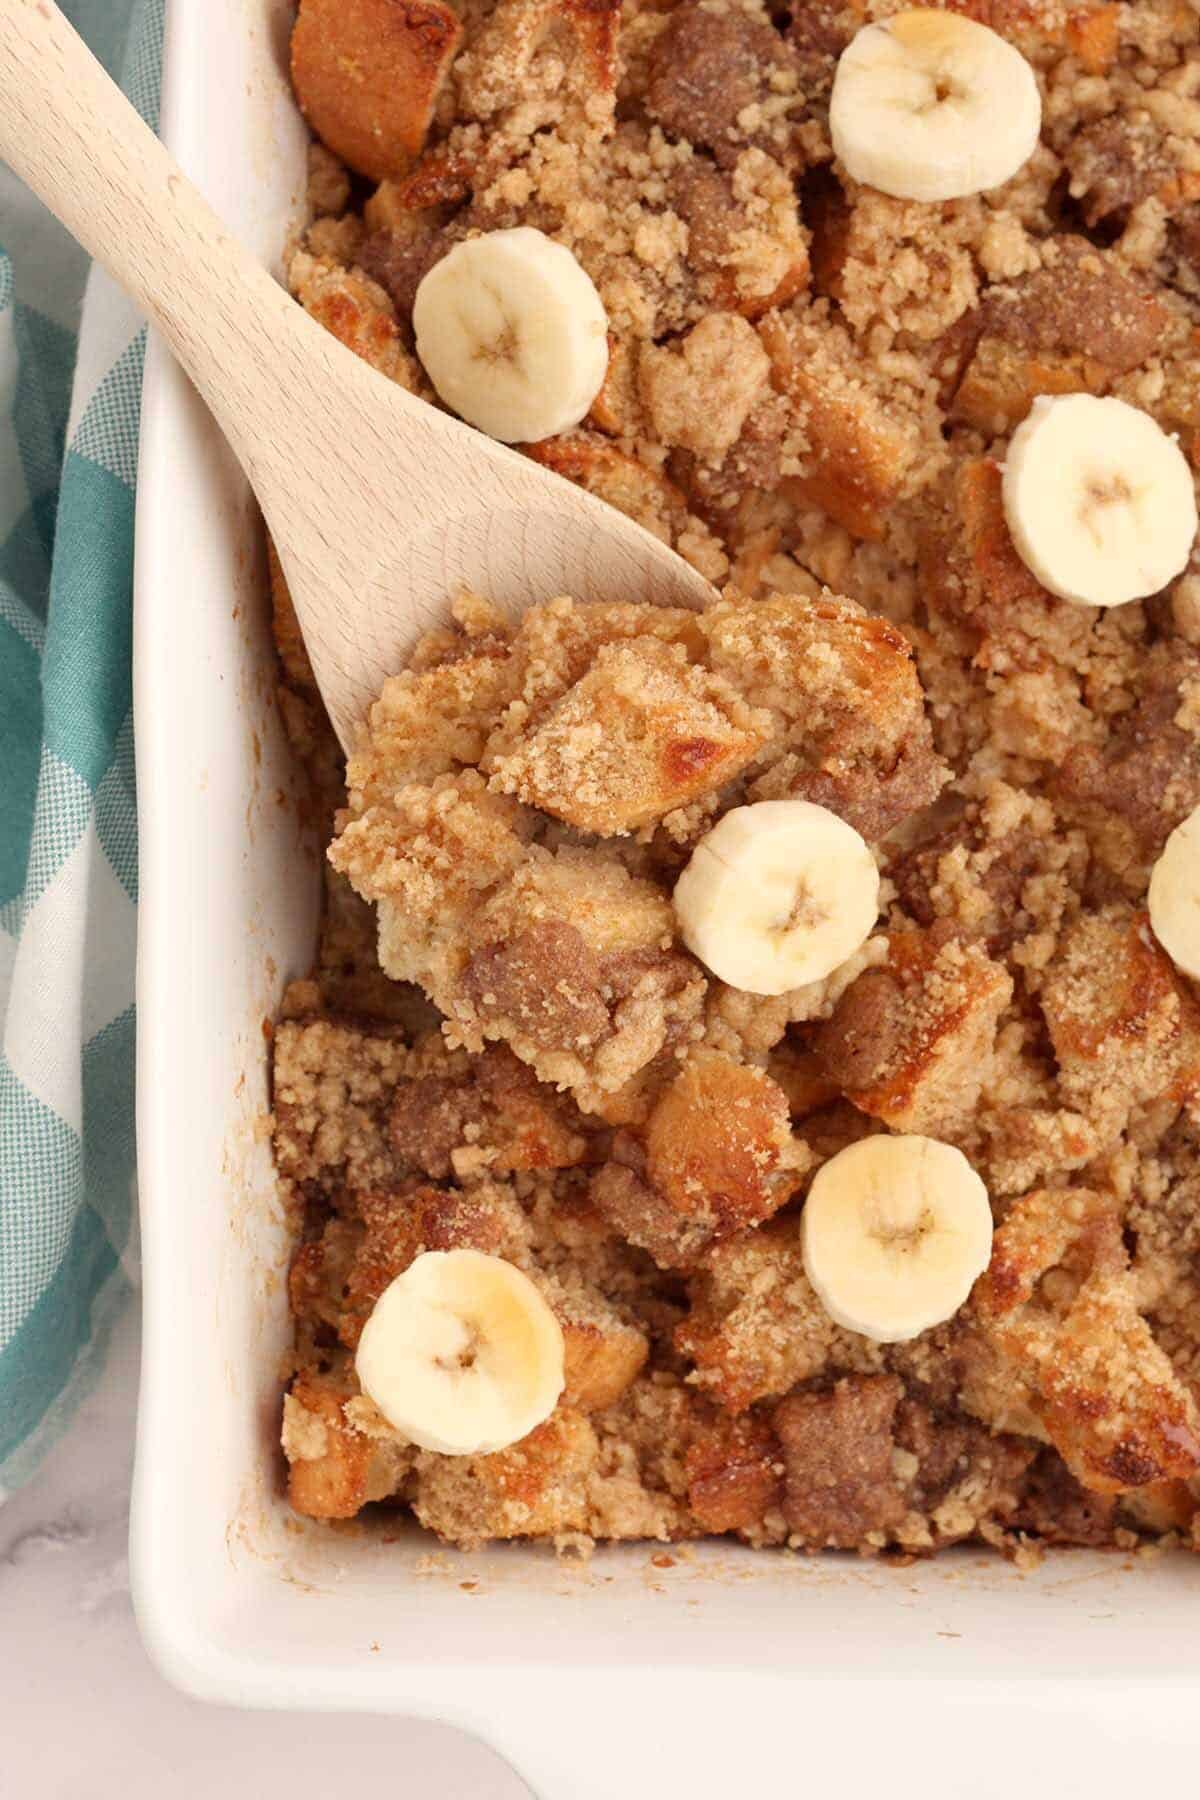 Baked french toast casserole topped with fresh bananas